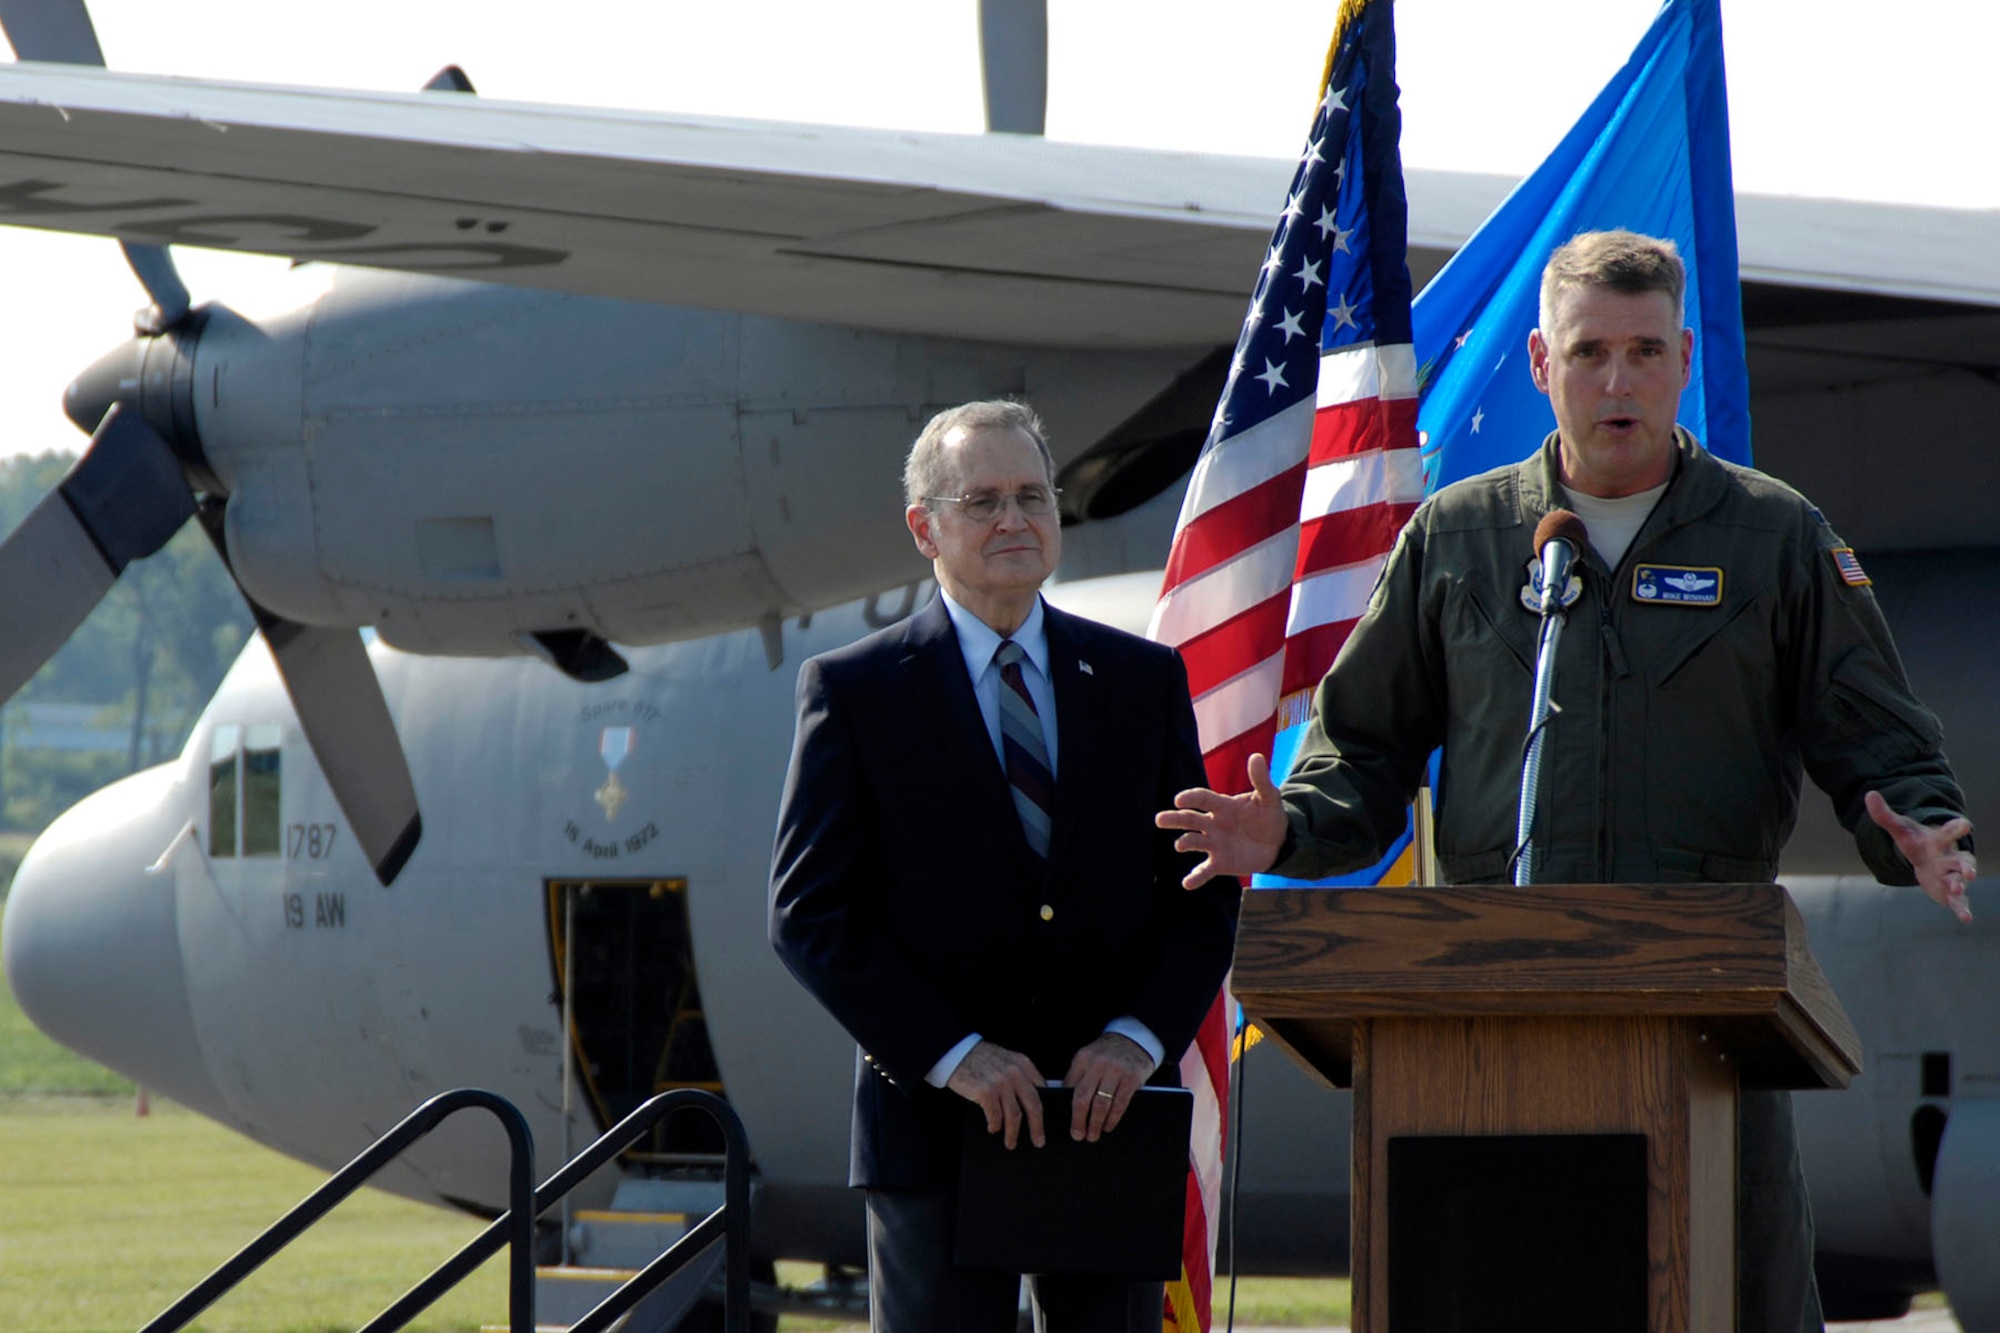 DAYTON, Ohio -- Col. Michael A. Minihan, commander of the 19th Airlift Wing, addresses the audience after the C-130E made its final flight on Aug. 18, 2011. Col. Minihan piloted the aircraft on its final flight. (U.S. Air Force photo by Michelle Gigante)